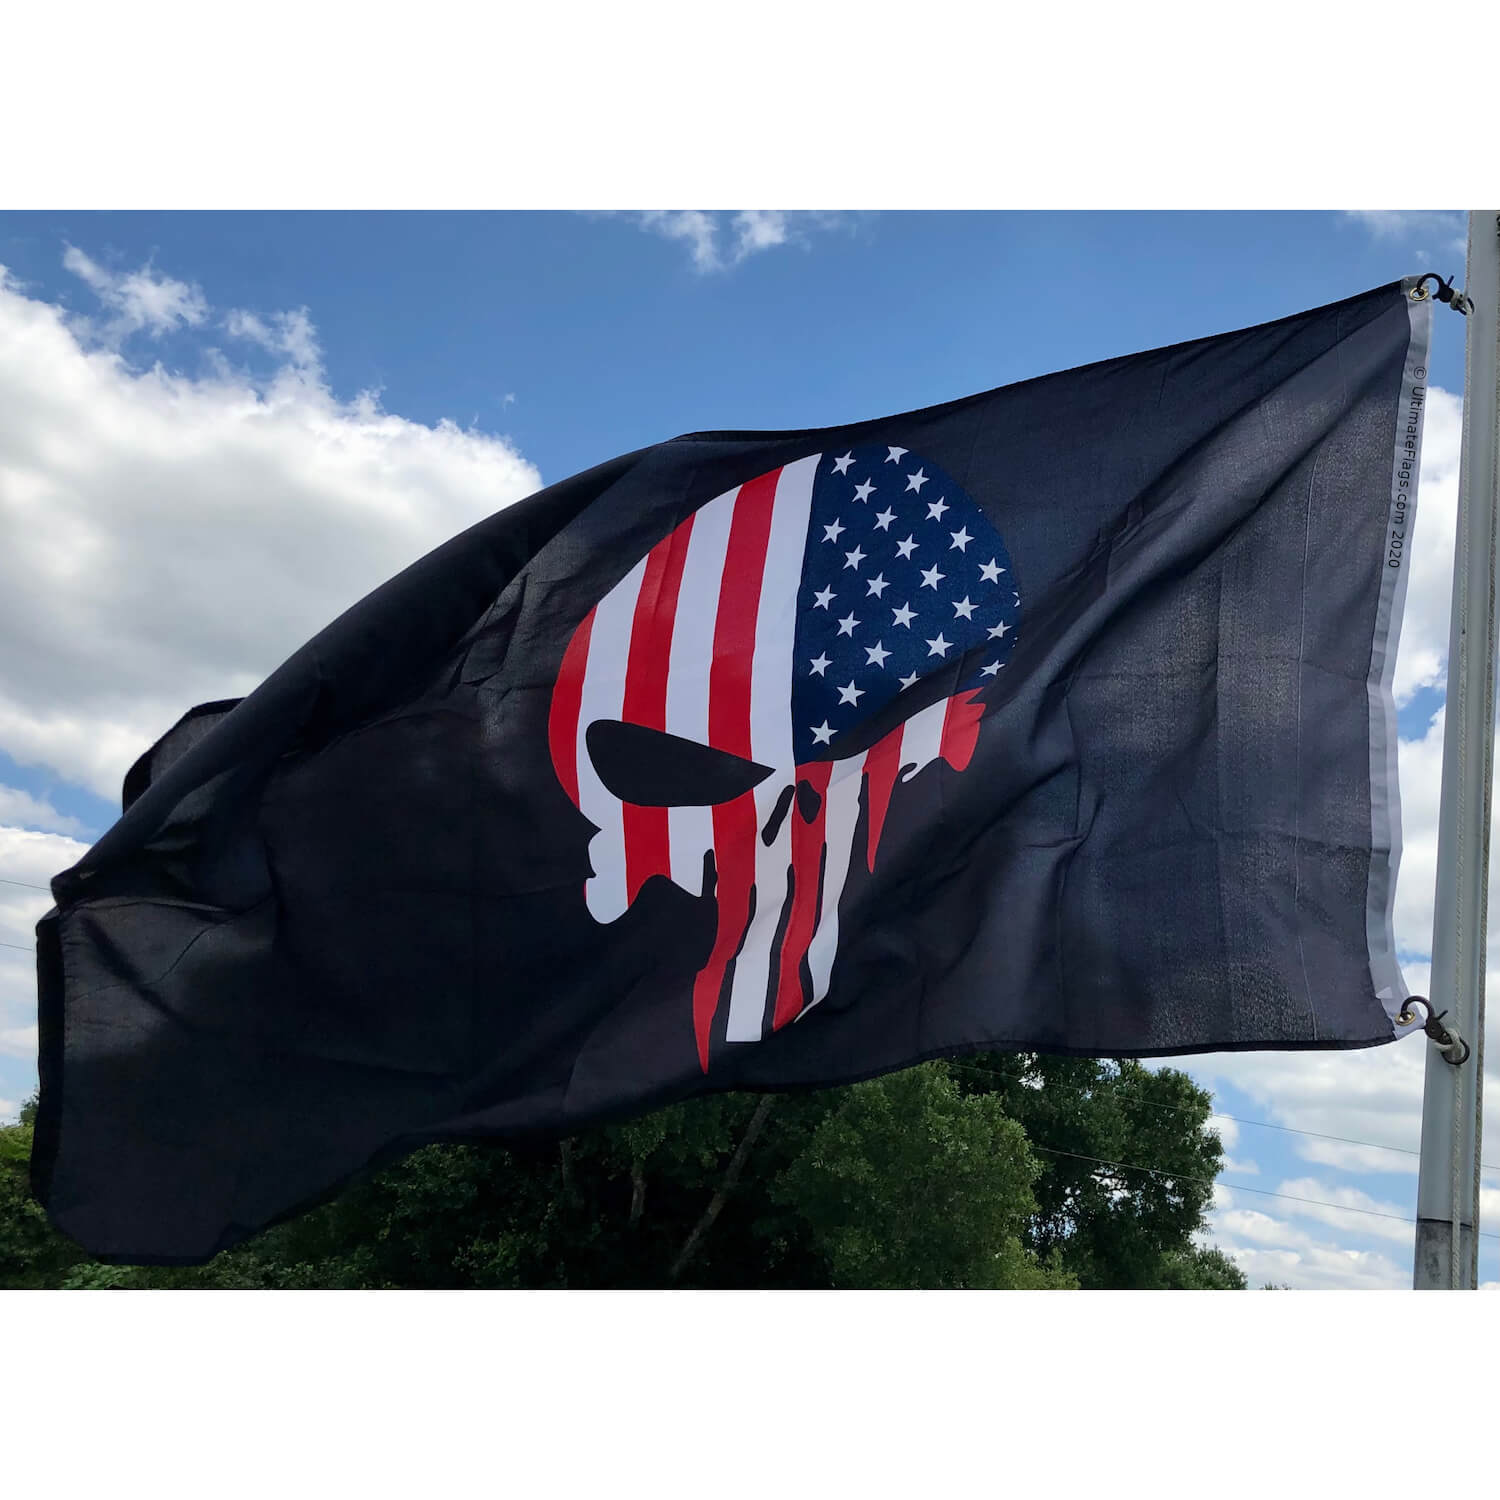 Ultimate Flags Inc: Your Source for Authentic Flags